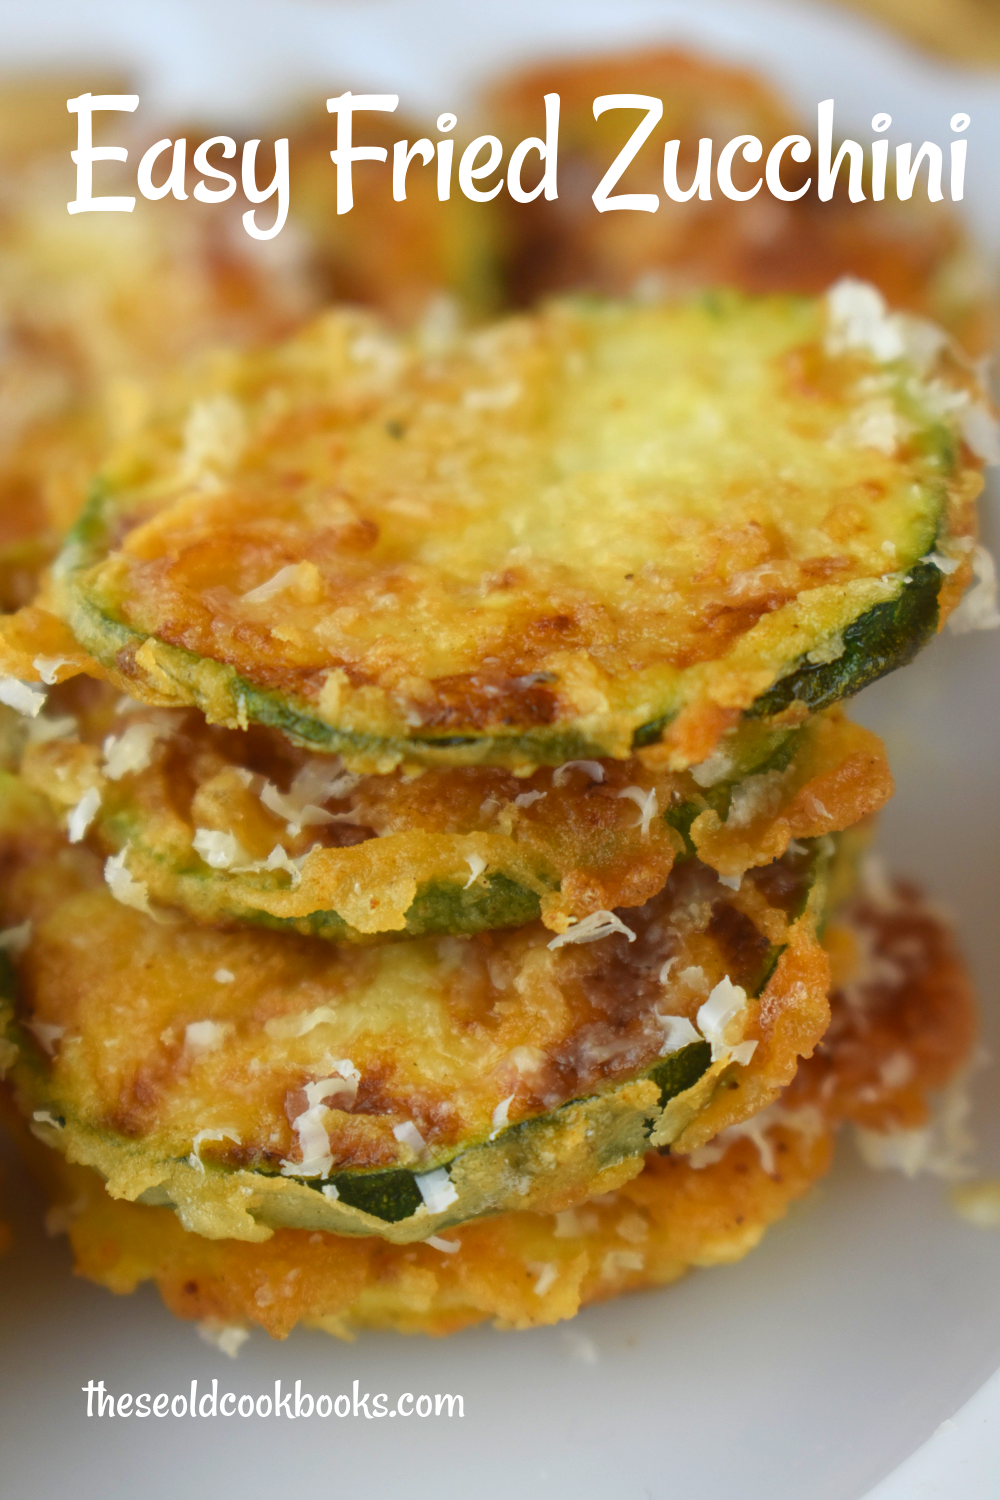 Easy Pan Fried Zucchini – How To Fry Zucchini Slices